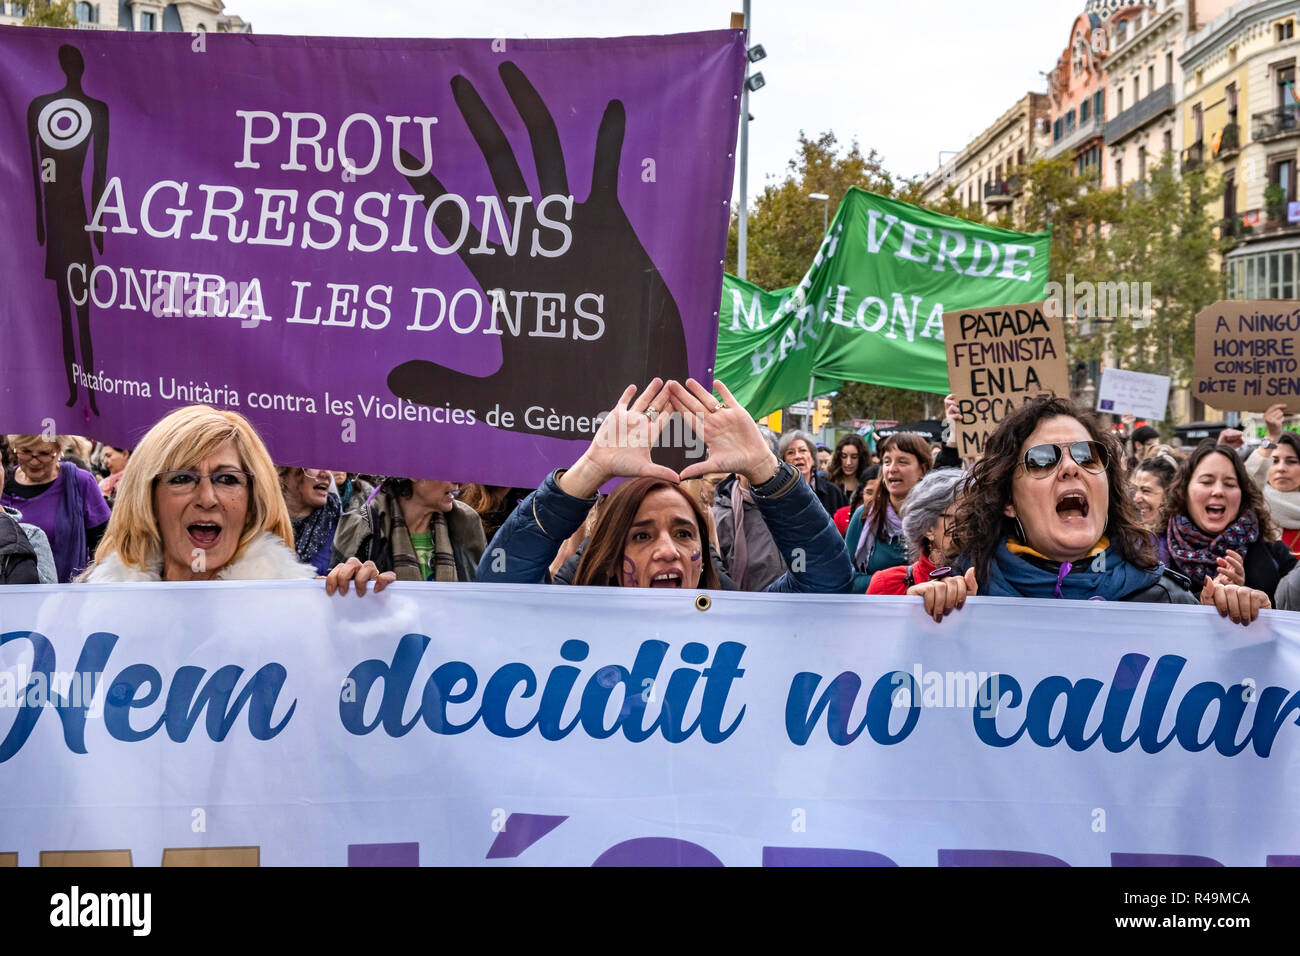 Women seen shouting slogans during the demonstration. Thousands of people have taken to the streets in Barcelona on the occasion of the International Day for the Elimination of Violence against Women. Stock Photo